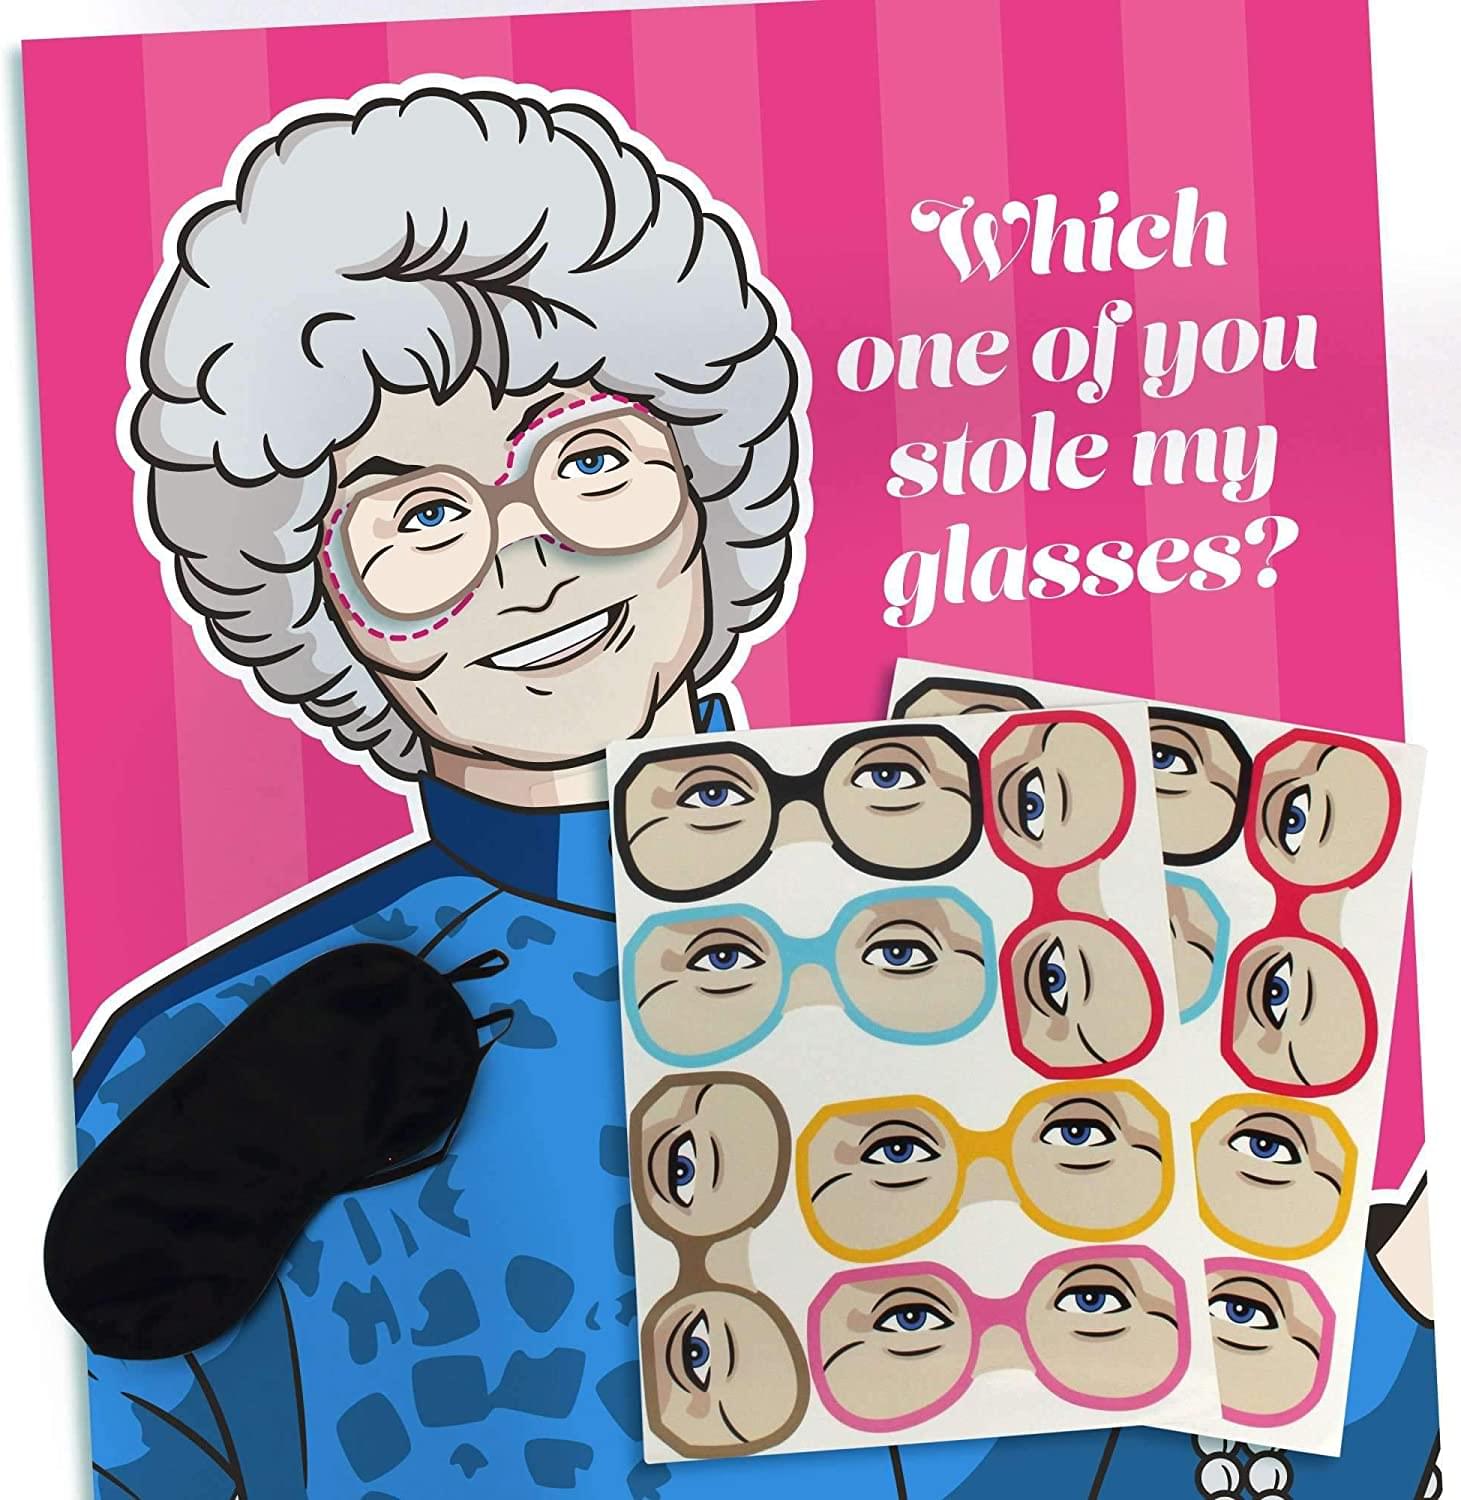 The Golden Girls Pin the Glasses on Sophia Party Game | Poster: 19.5" x 27.5", Includes 12 glasses (stickers) and one polyester blindfold.